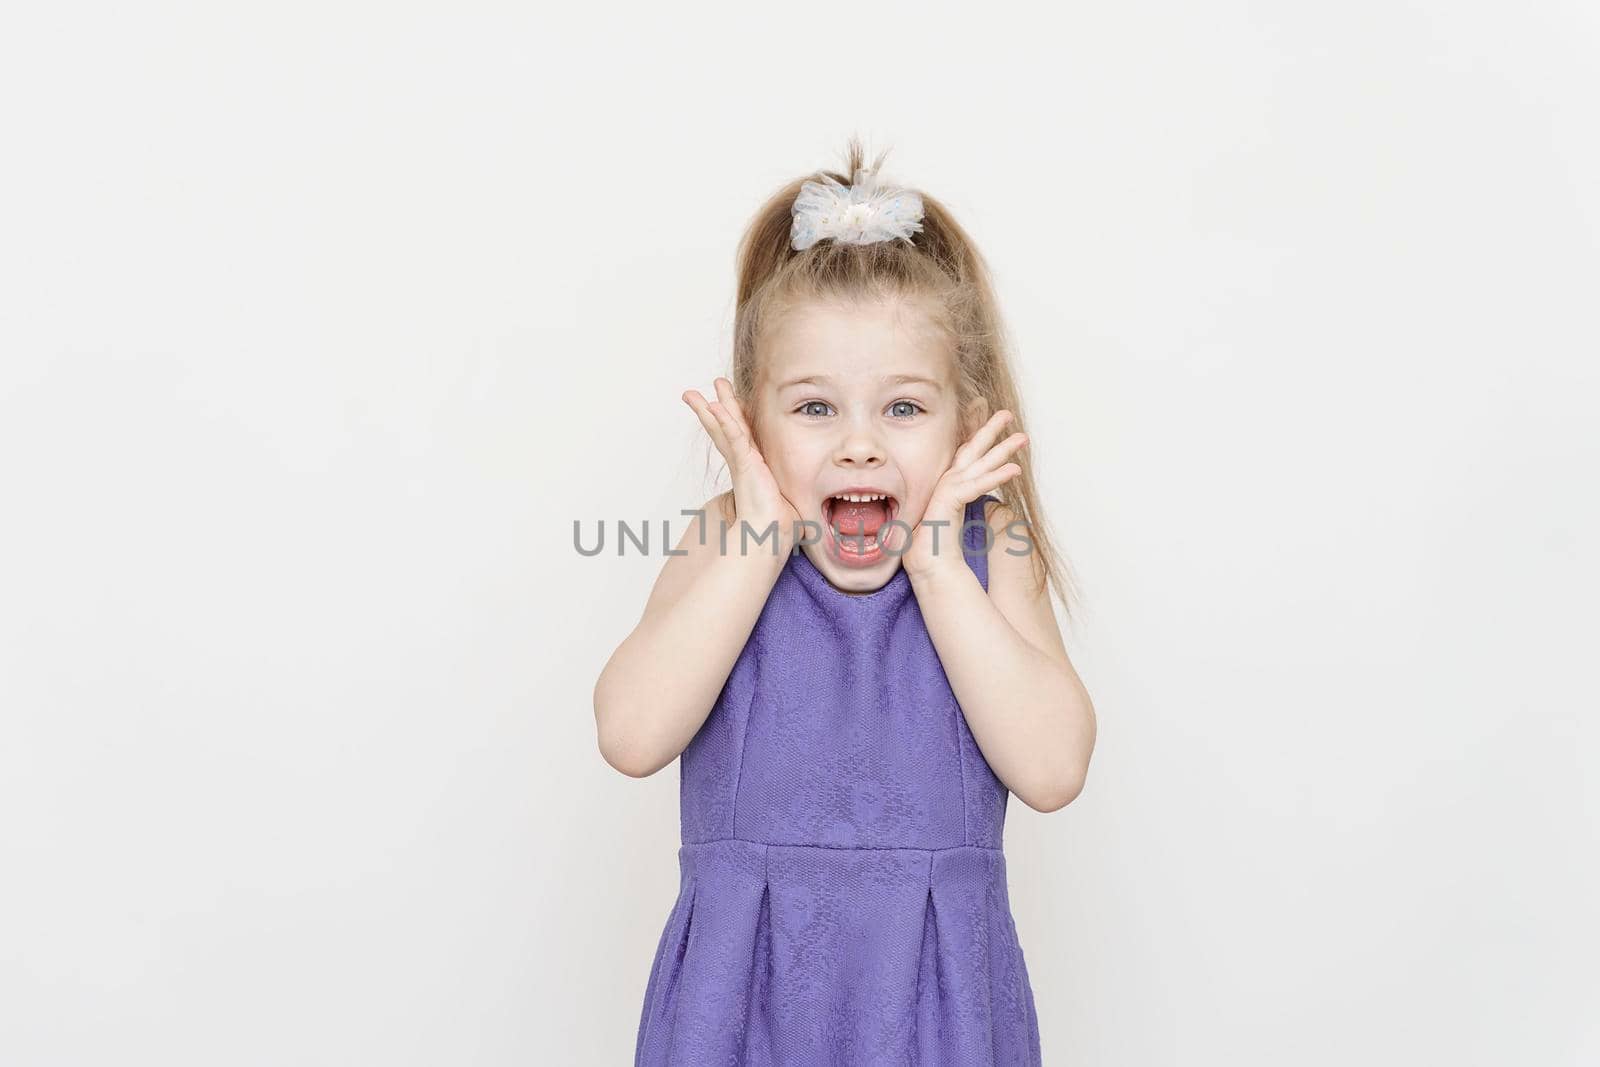 portrait of a cute 5 year old girl with a shocked expression on a light background